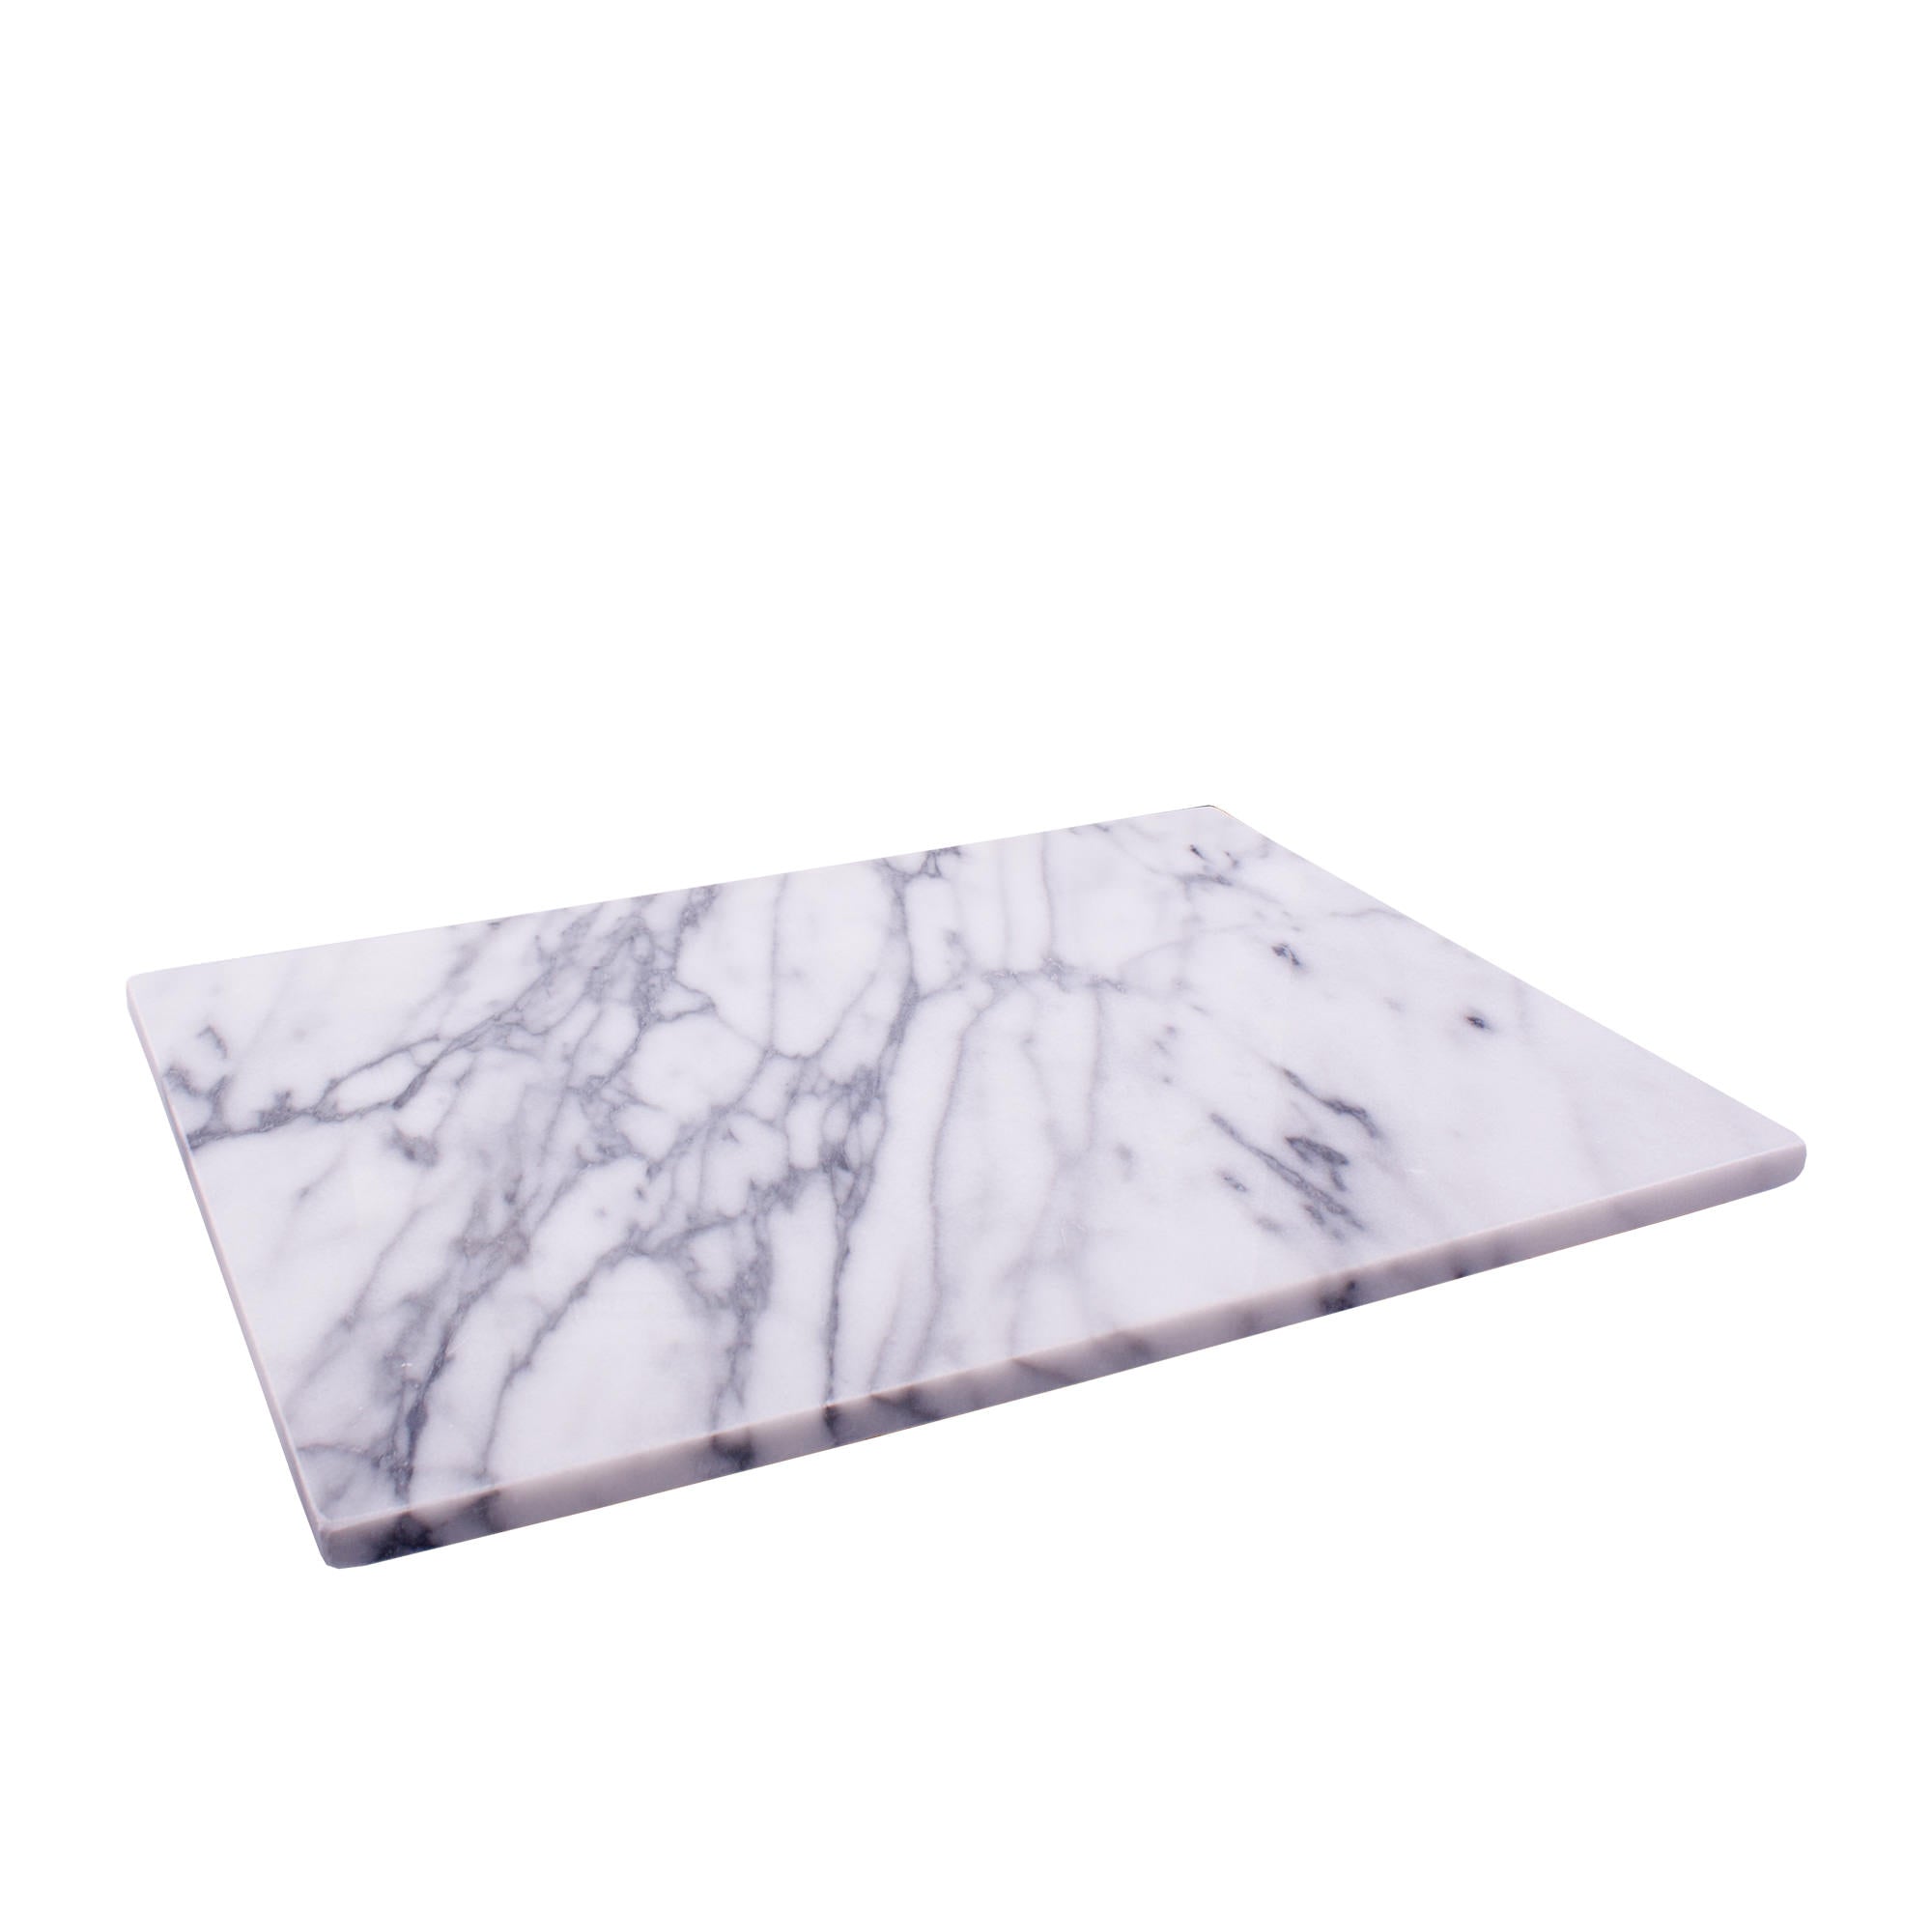 D.line Grey Marble Pastry Board 40x30cm